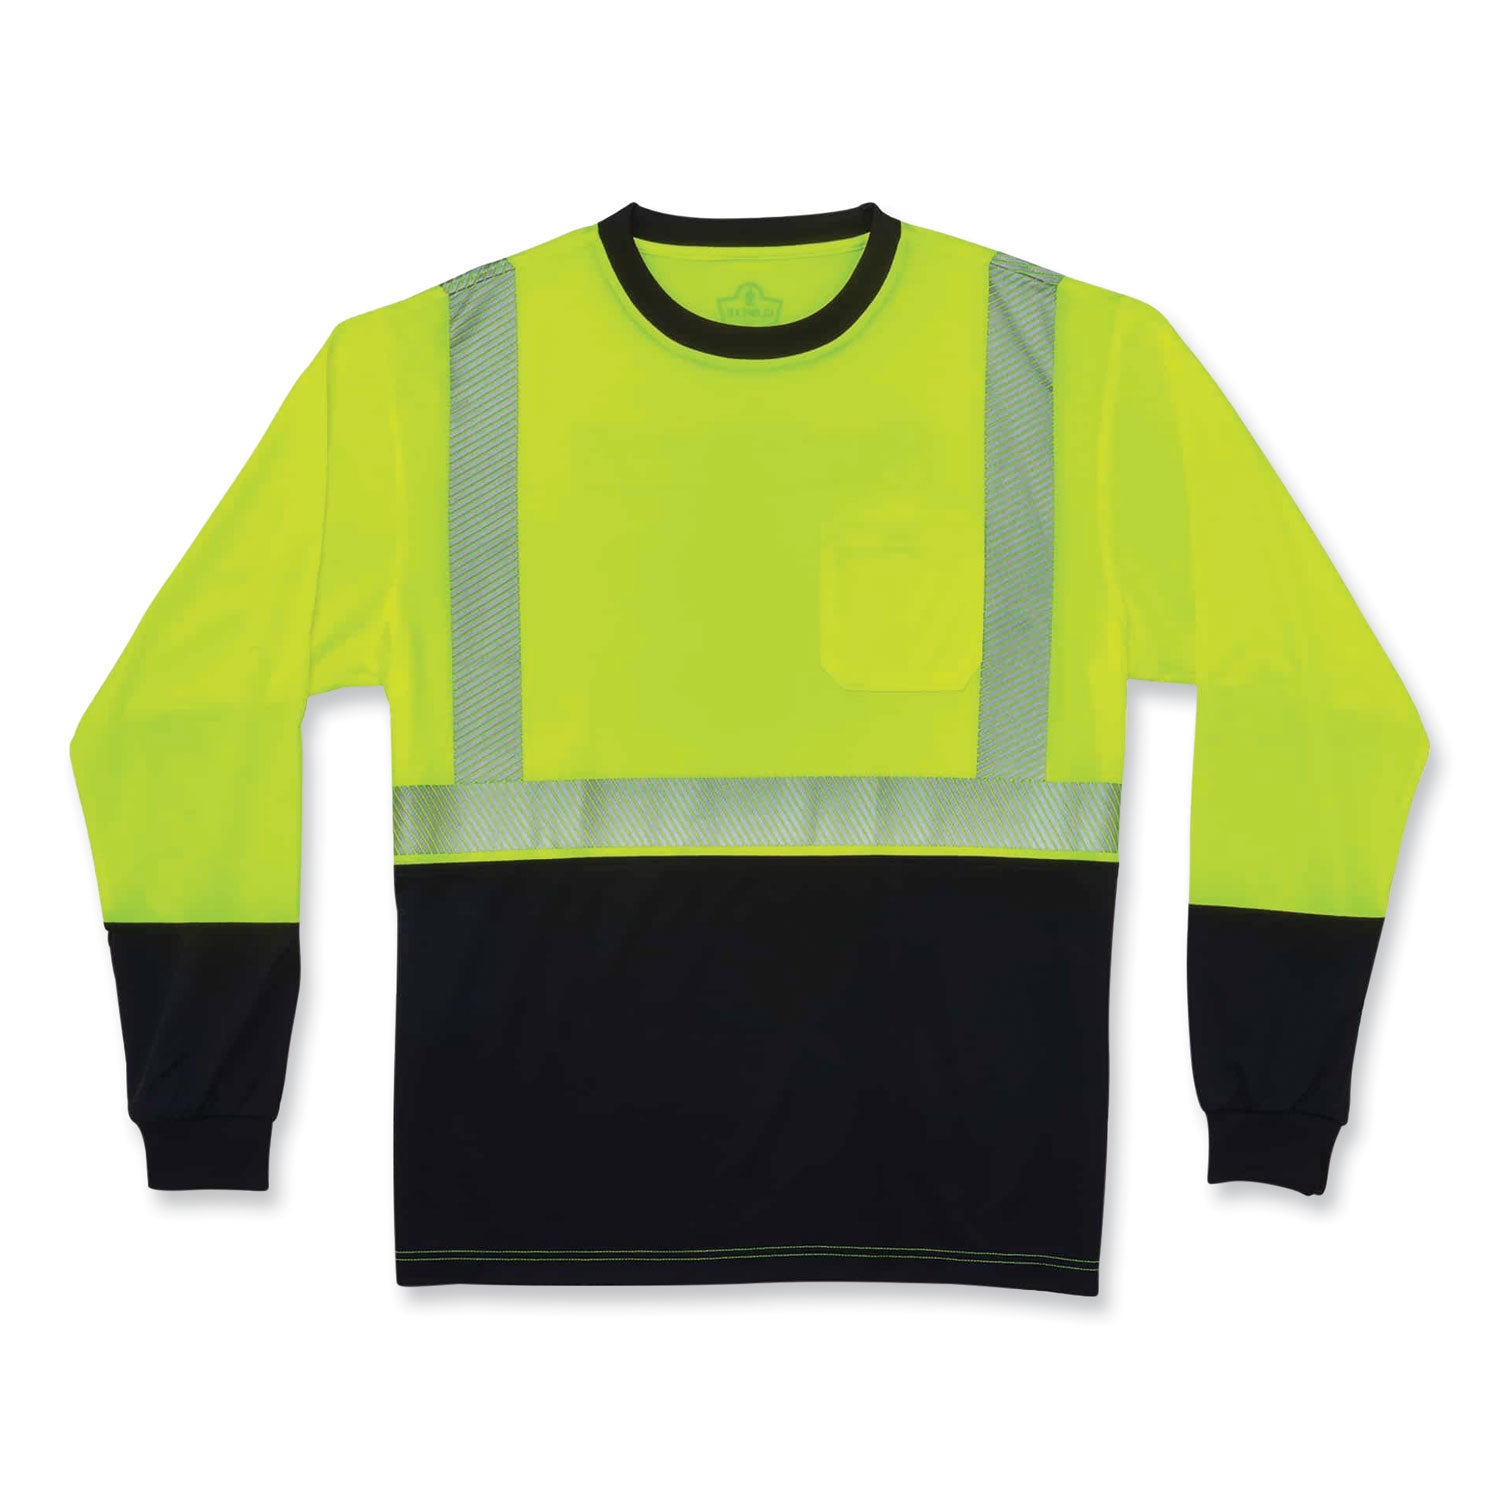 glowear-8281bk-class-2-long-sleeve-shirt-with-black-bottom-polyester-4x-large-lime-ships-in-1-3-business-days_ego22638 - 1